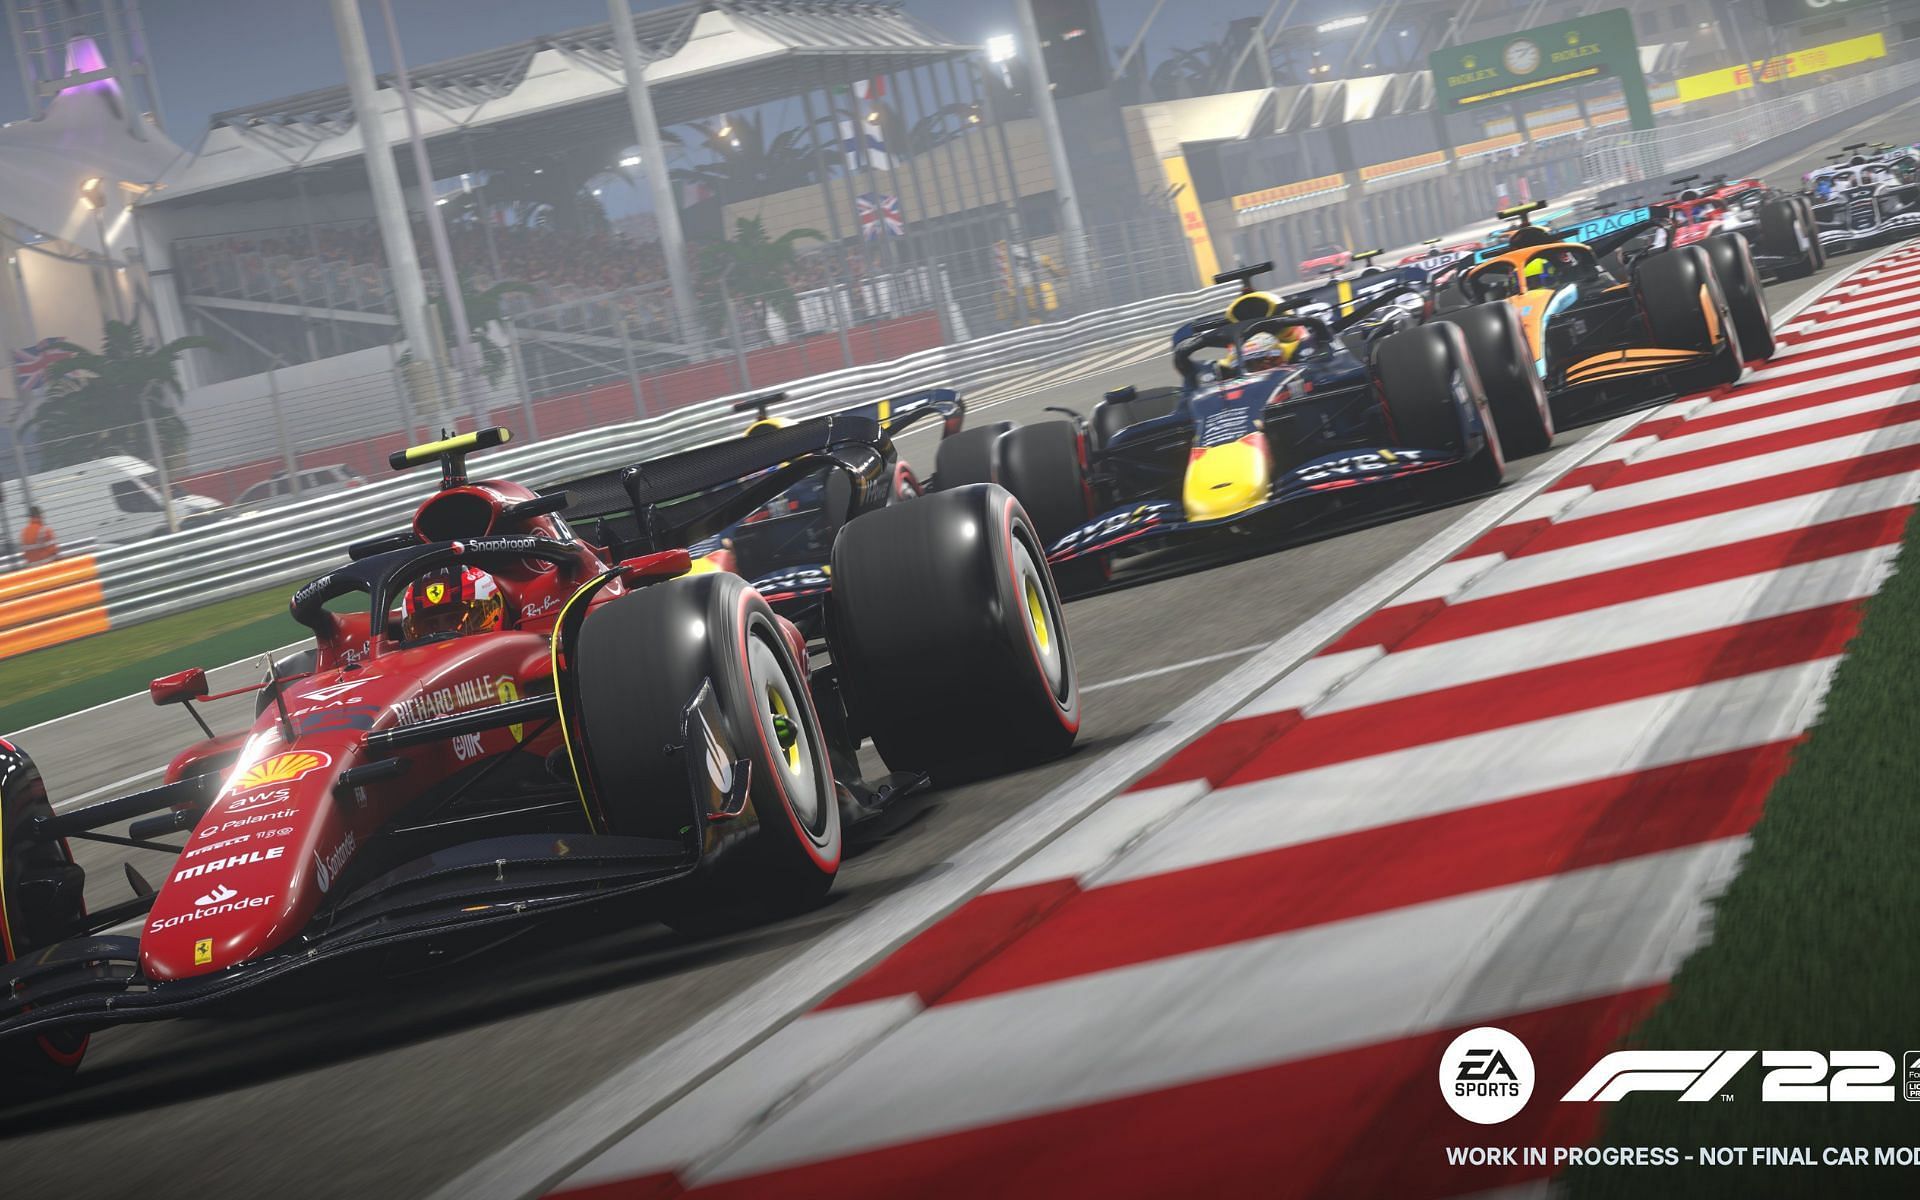 A visual from the upcoming game (Image source: Twitter/@Formula1game)